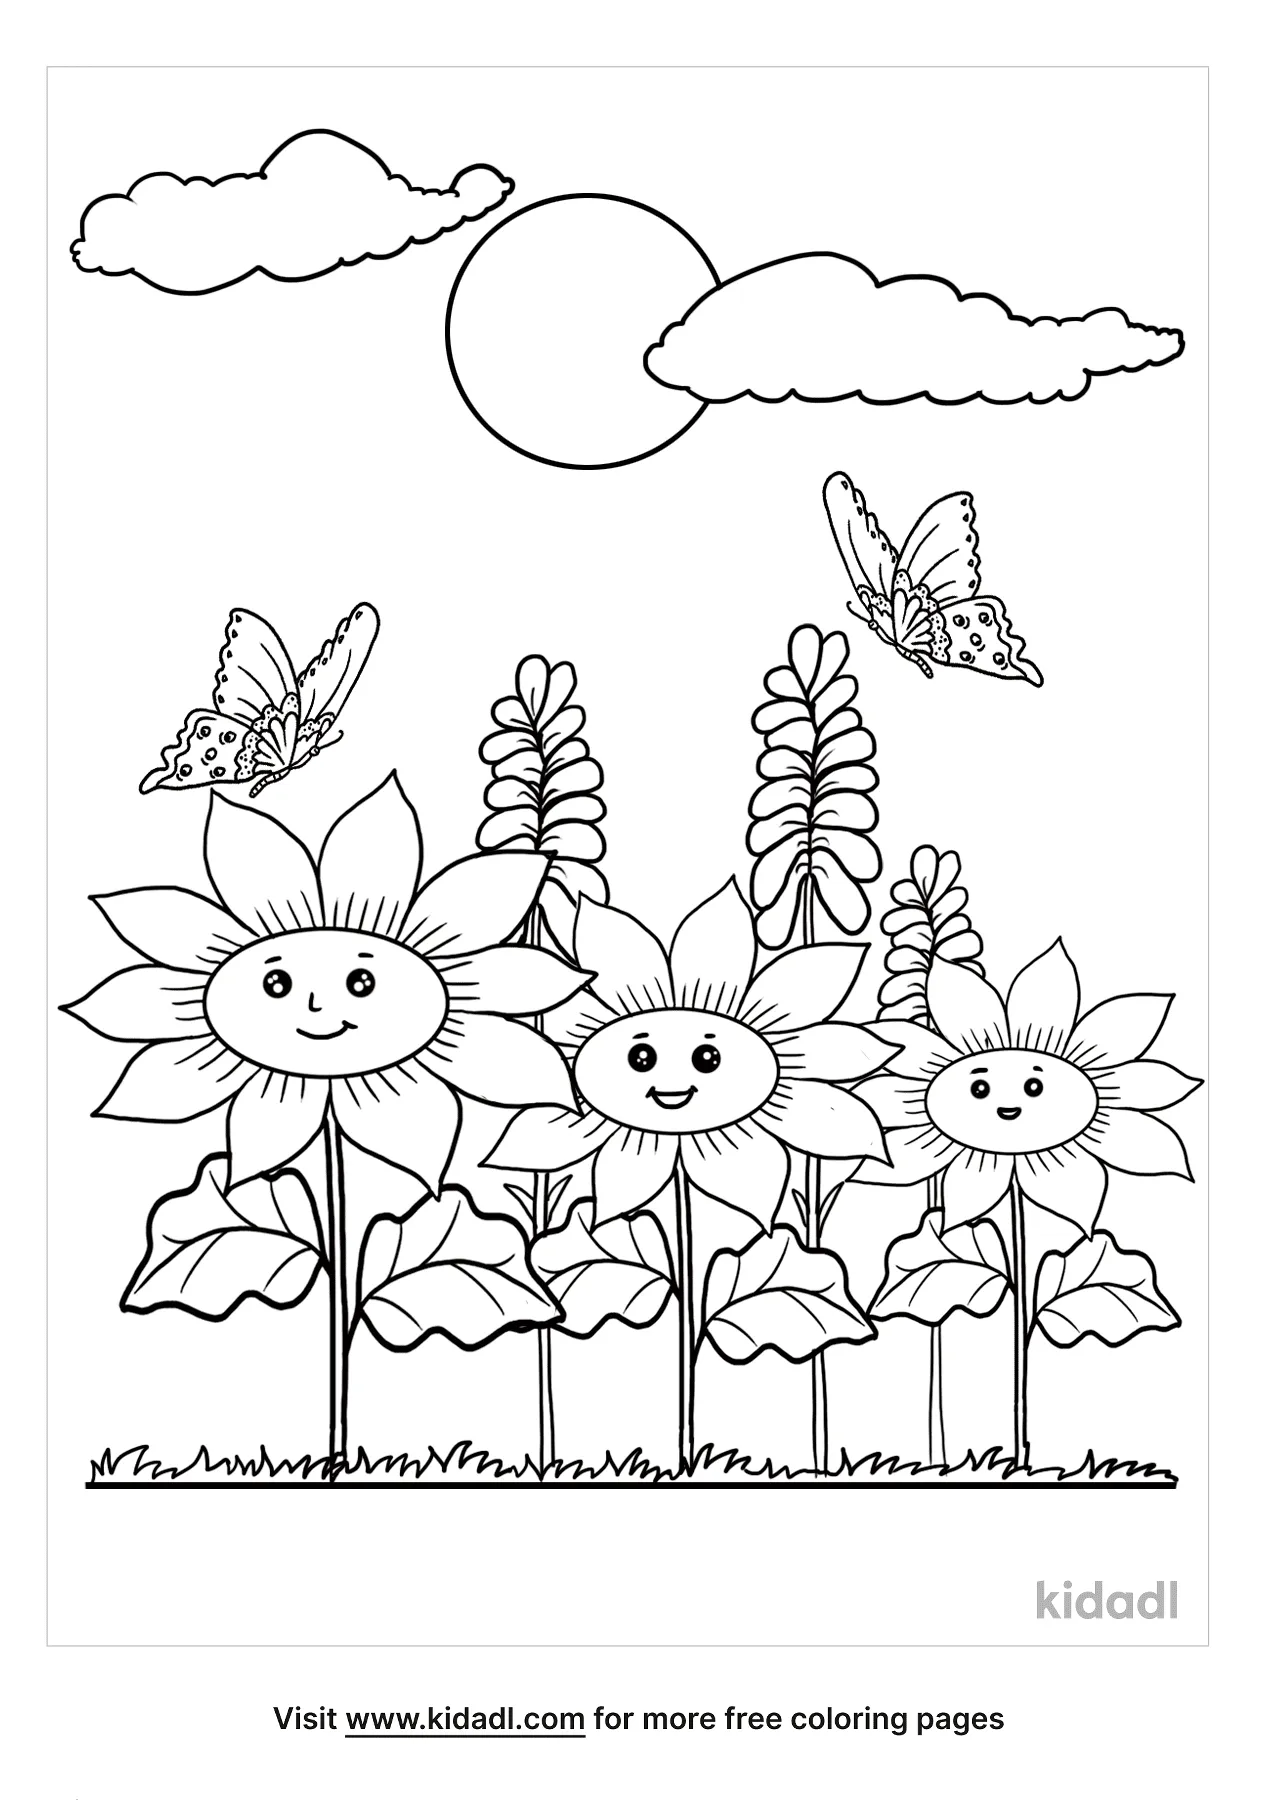 Flower Garden Coloring Pages Free Flowers Coloring Pages Kidadl